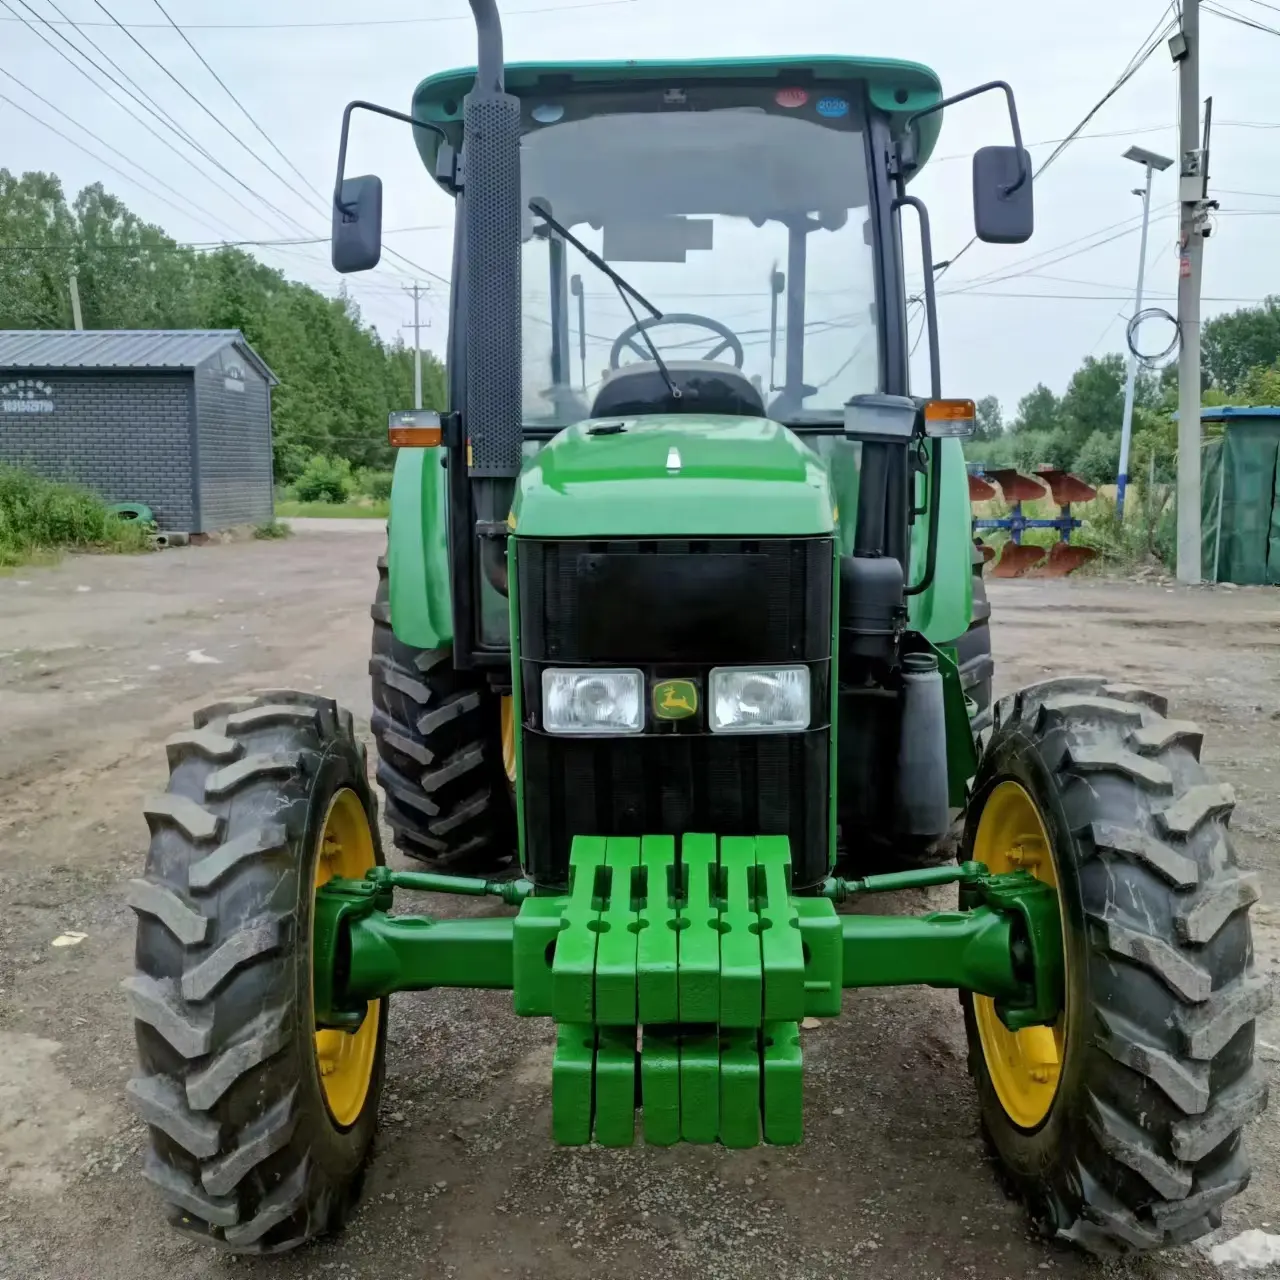 75hp used farm tractor for sale JohnN DEERE with front loader disc harrow disc plough tiller